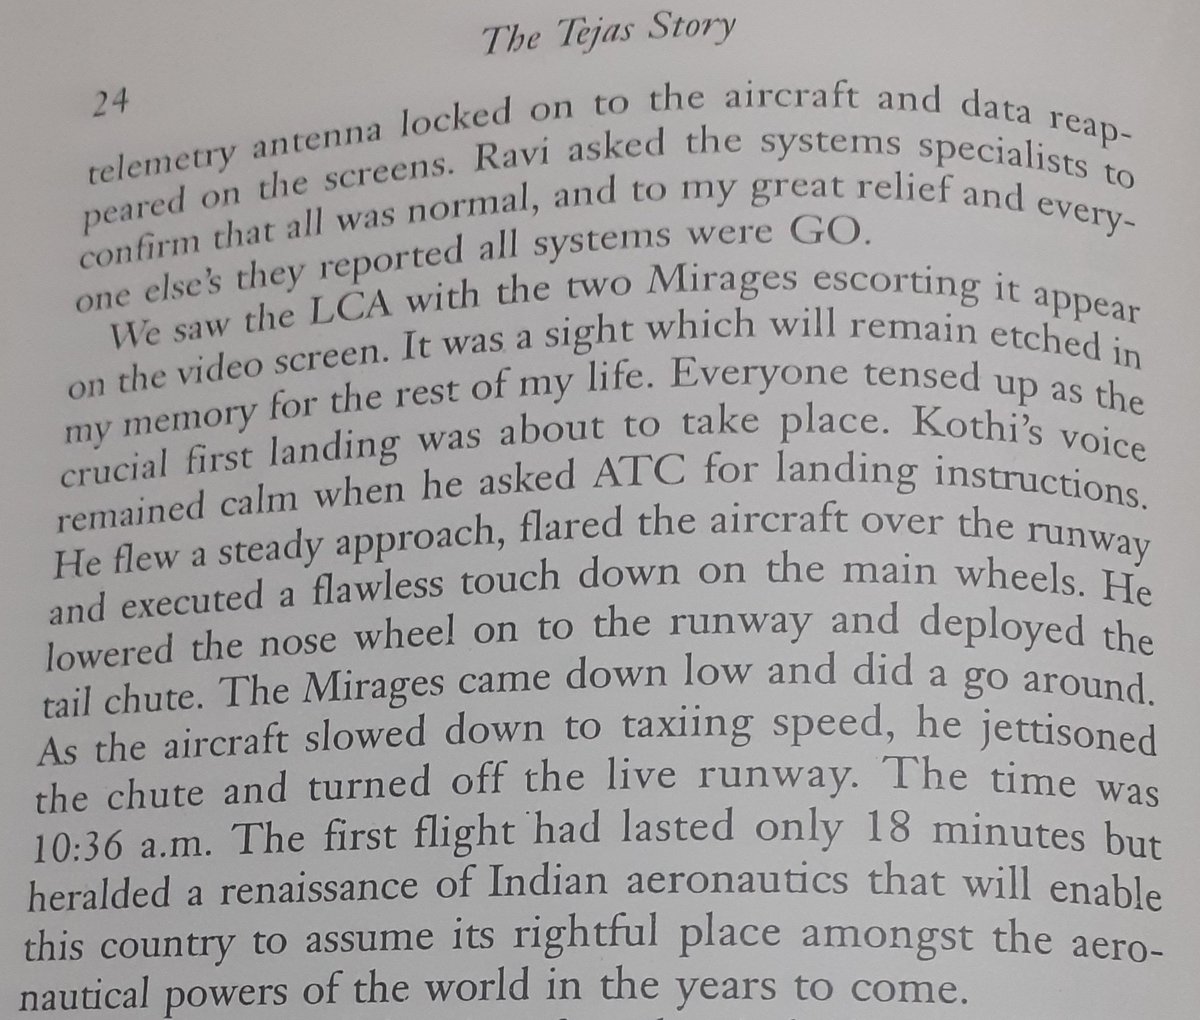 Now it was time for another breathless moment when first Landing was about to happen.But WC Kothi executed a flawless landing. The first flight lasted only about 18 min but it indeed heralded a new era for the Indian Aviation.14/n